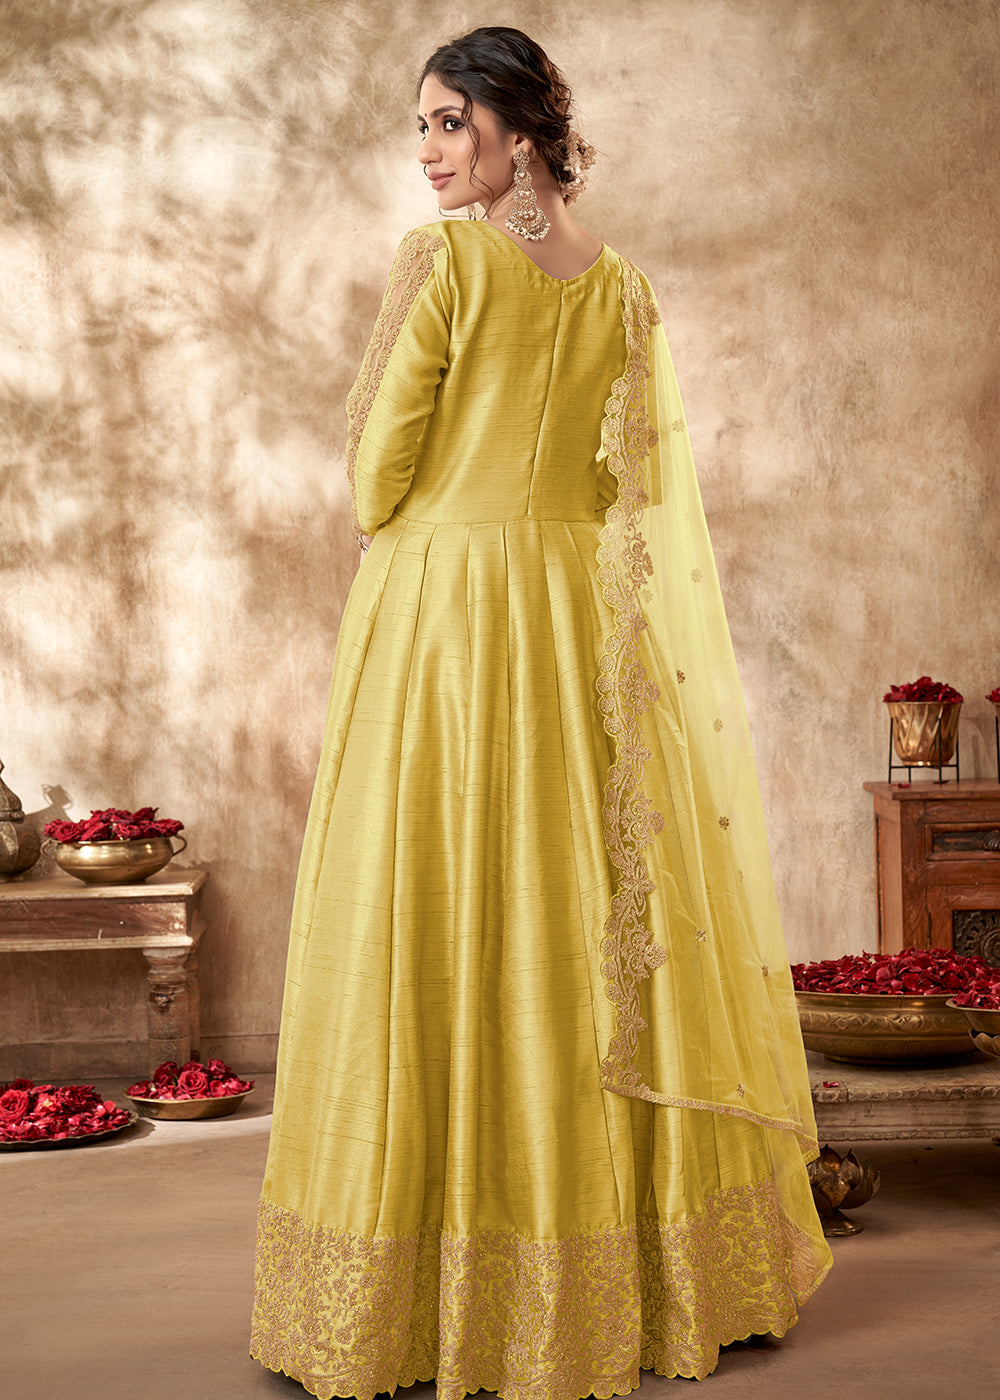 Buy Now Engaging Yellow Art Silk Zari Embroidered Festive Anarkali Gown Online in UK at Empress Clothing.